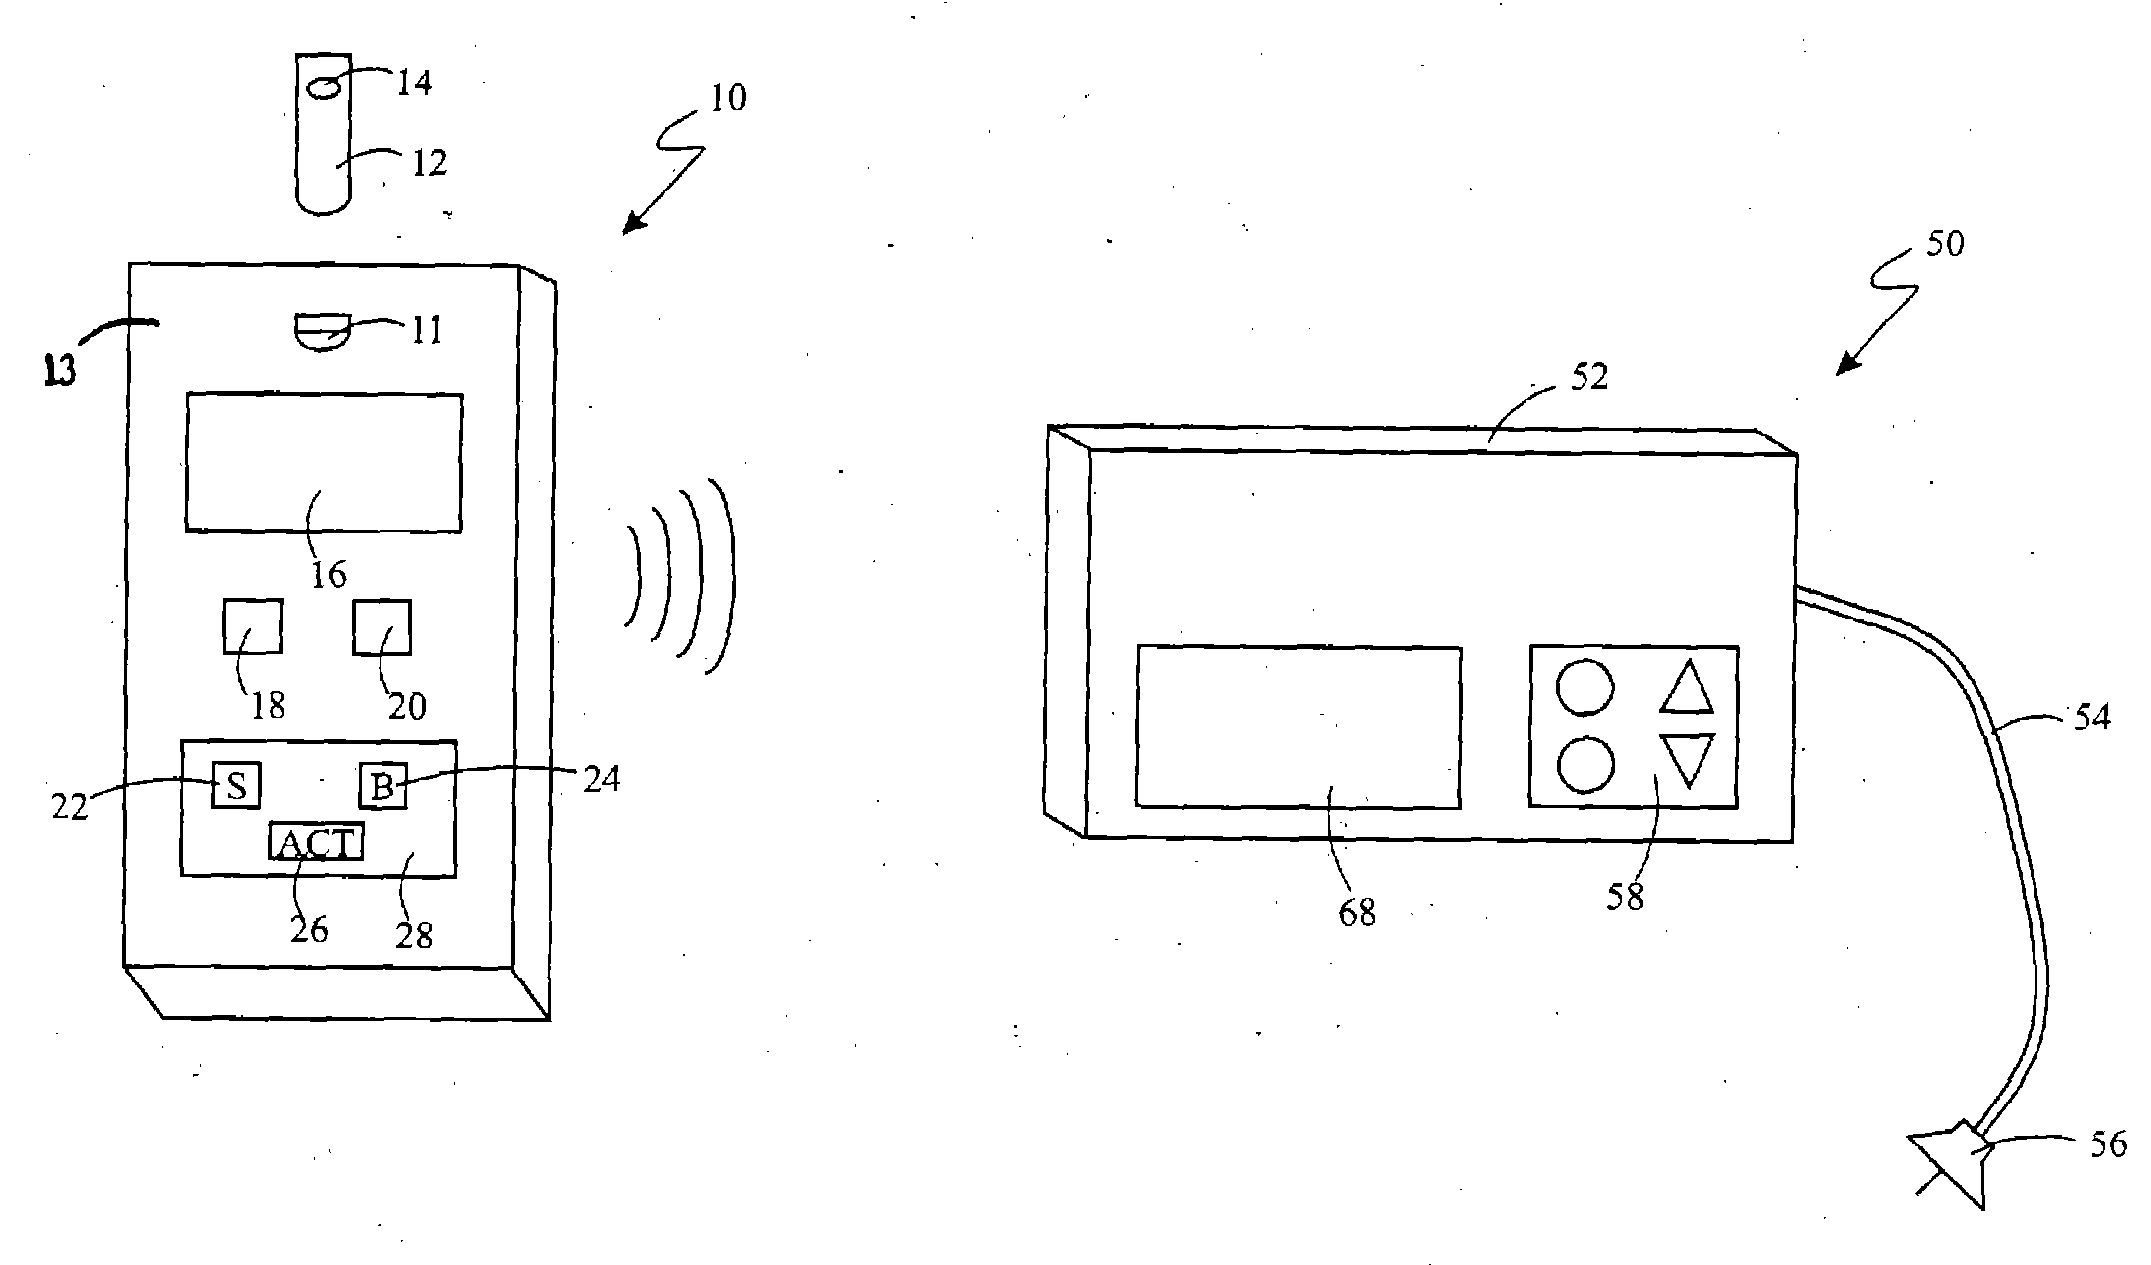 System for Providing Blood Glucose Measurements to an Infusion Device